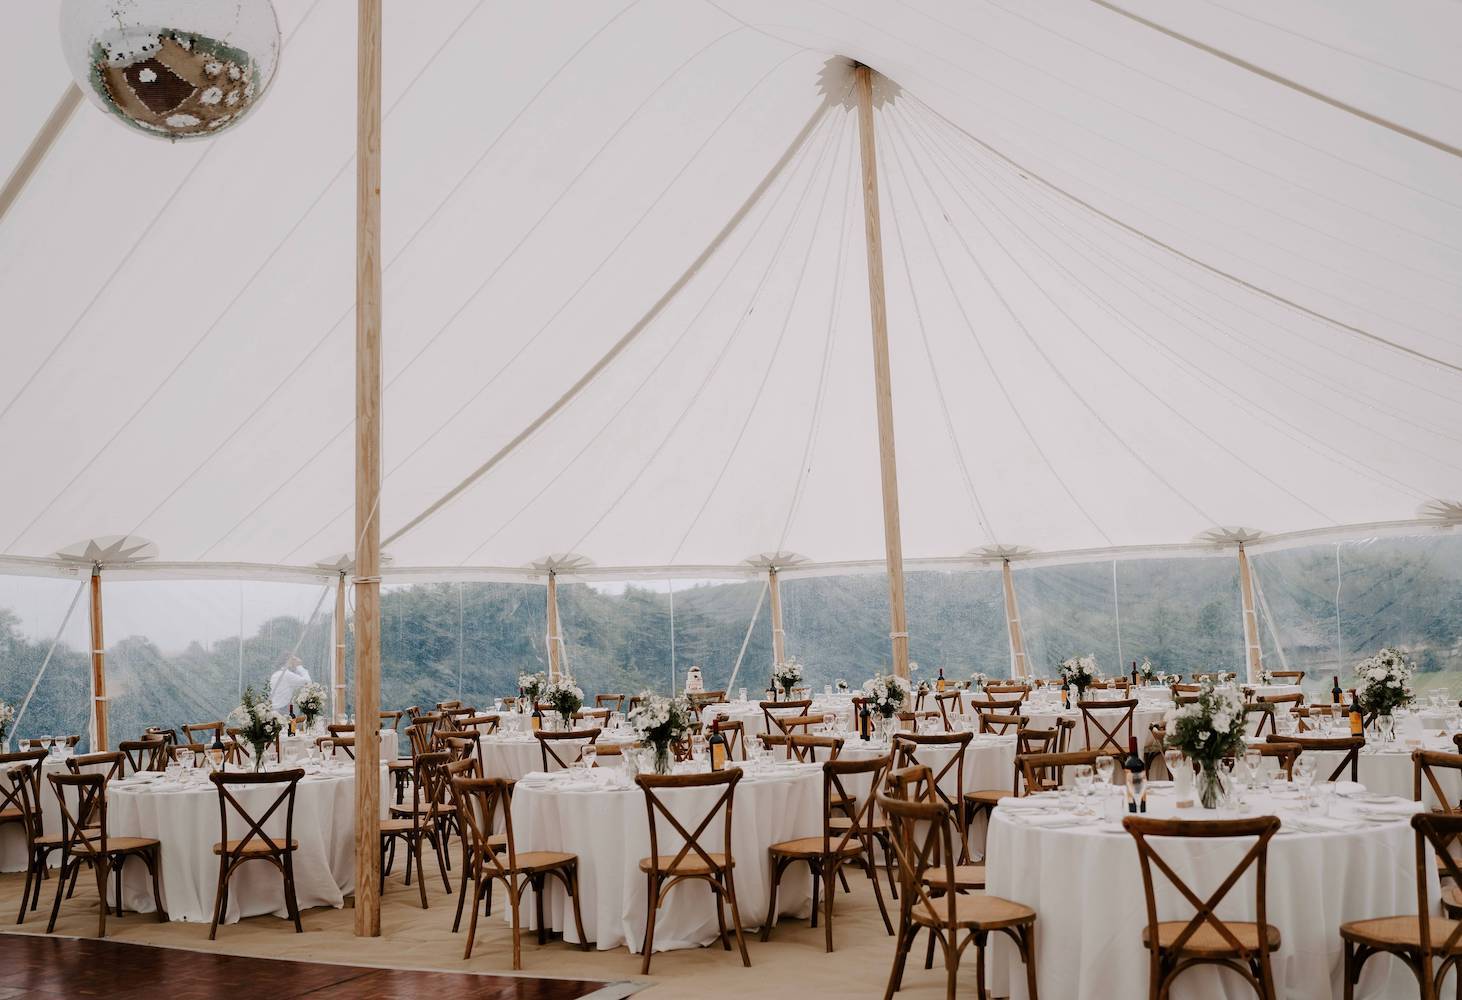 Sailcloth Wedding Marquee Interior: Round Tables, Cross Back Chairs, and Elegant Mirror Ball